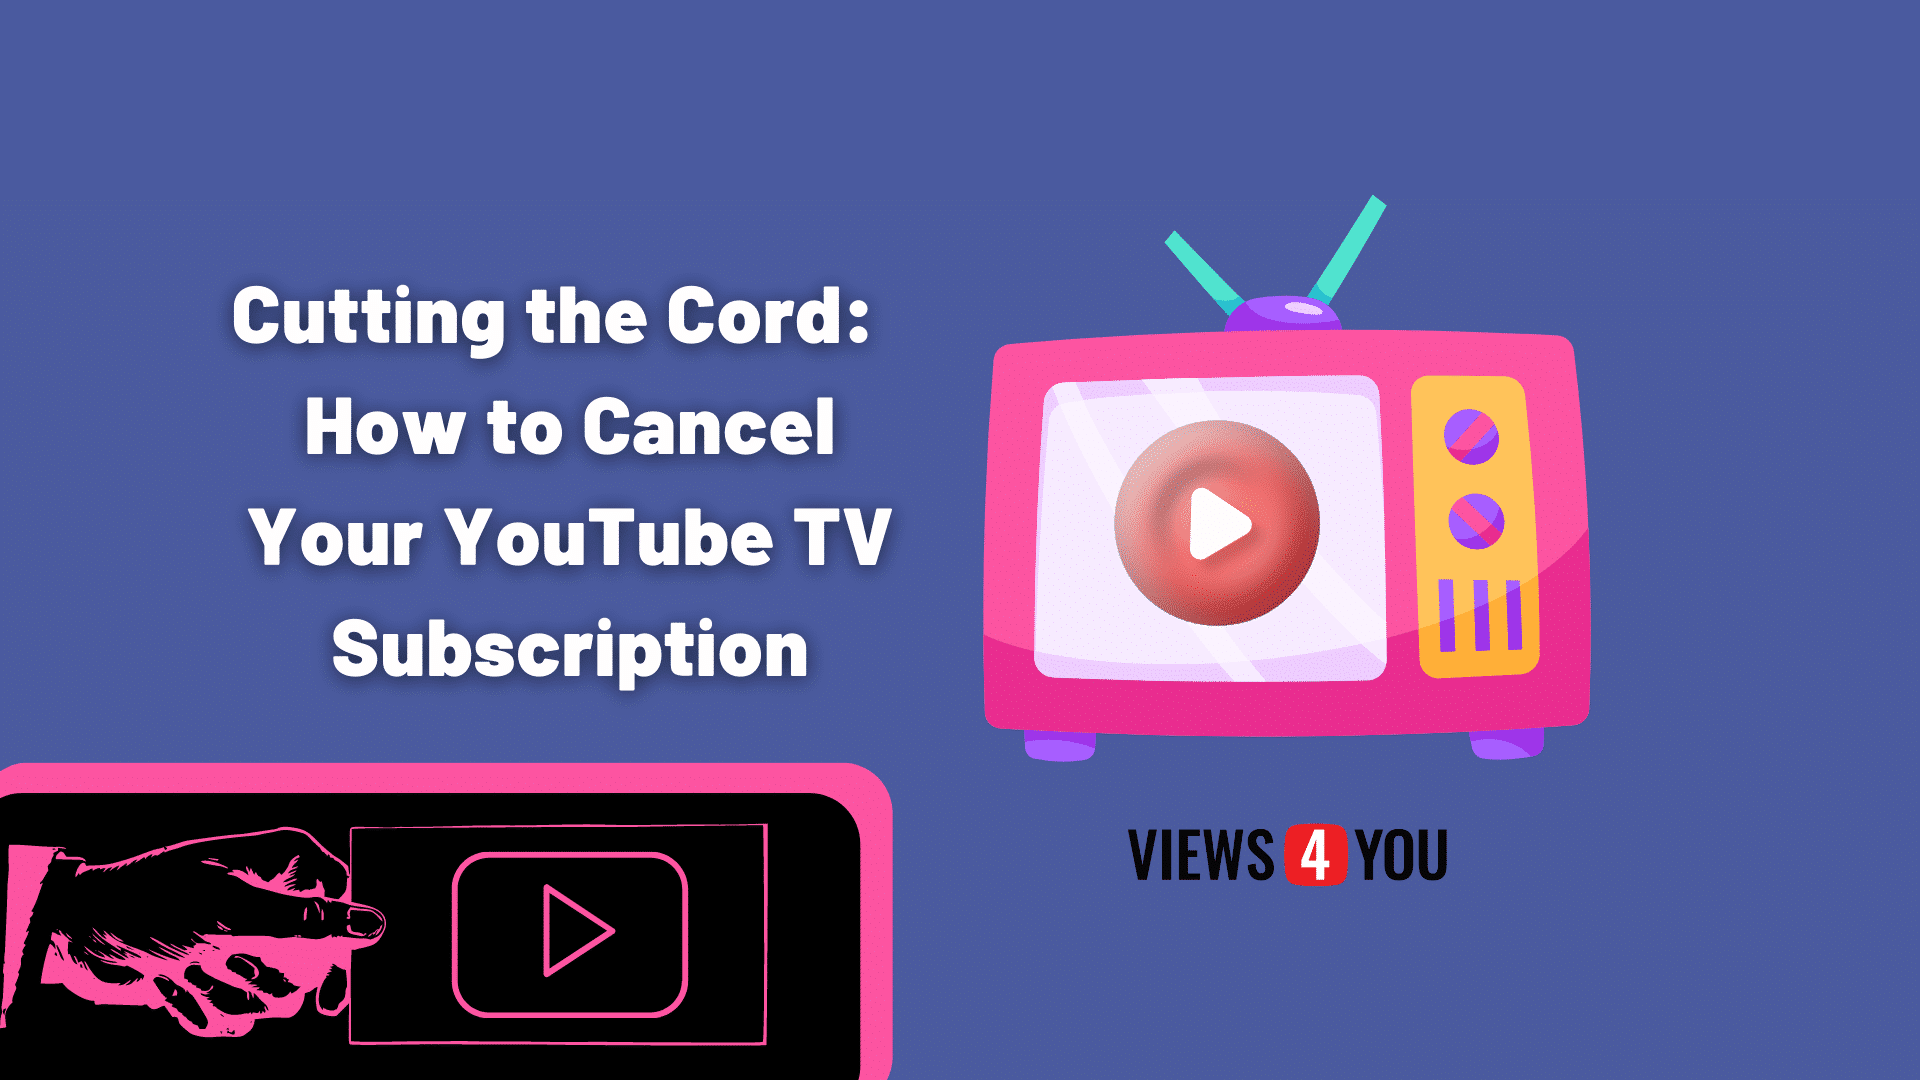 Cutting the Cord How to Cancel Your YouTube TV Subscription